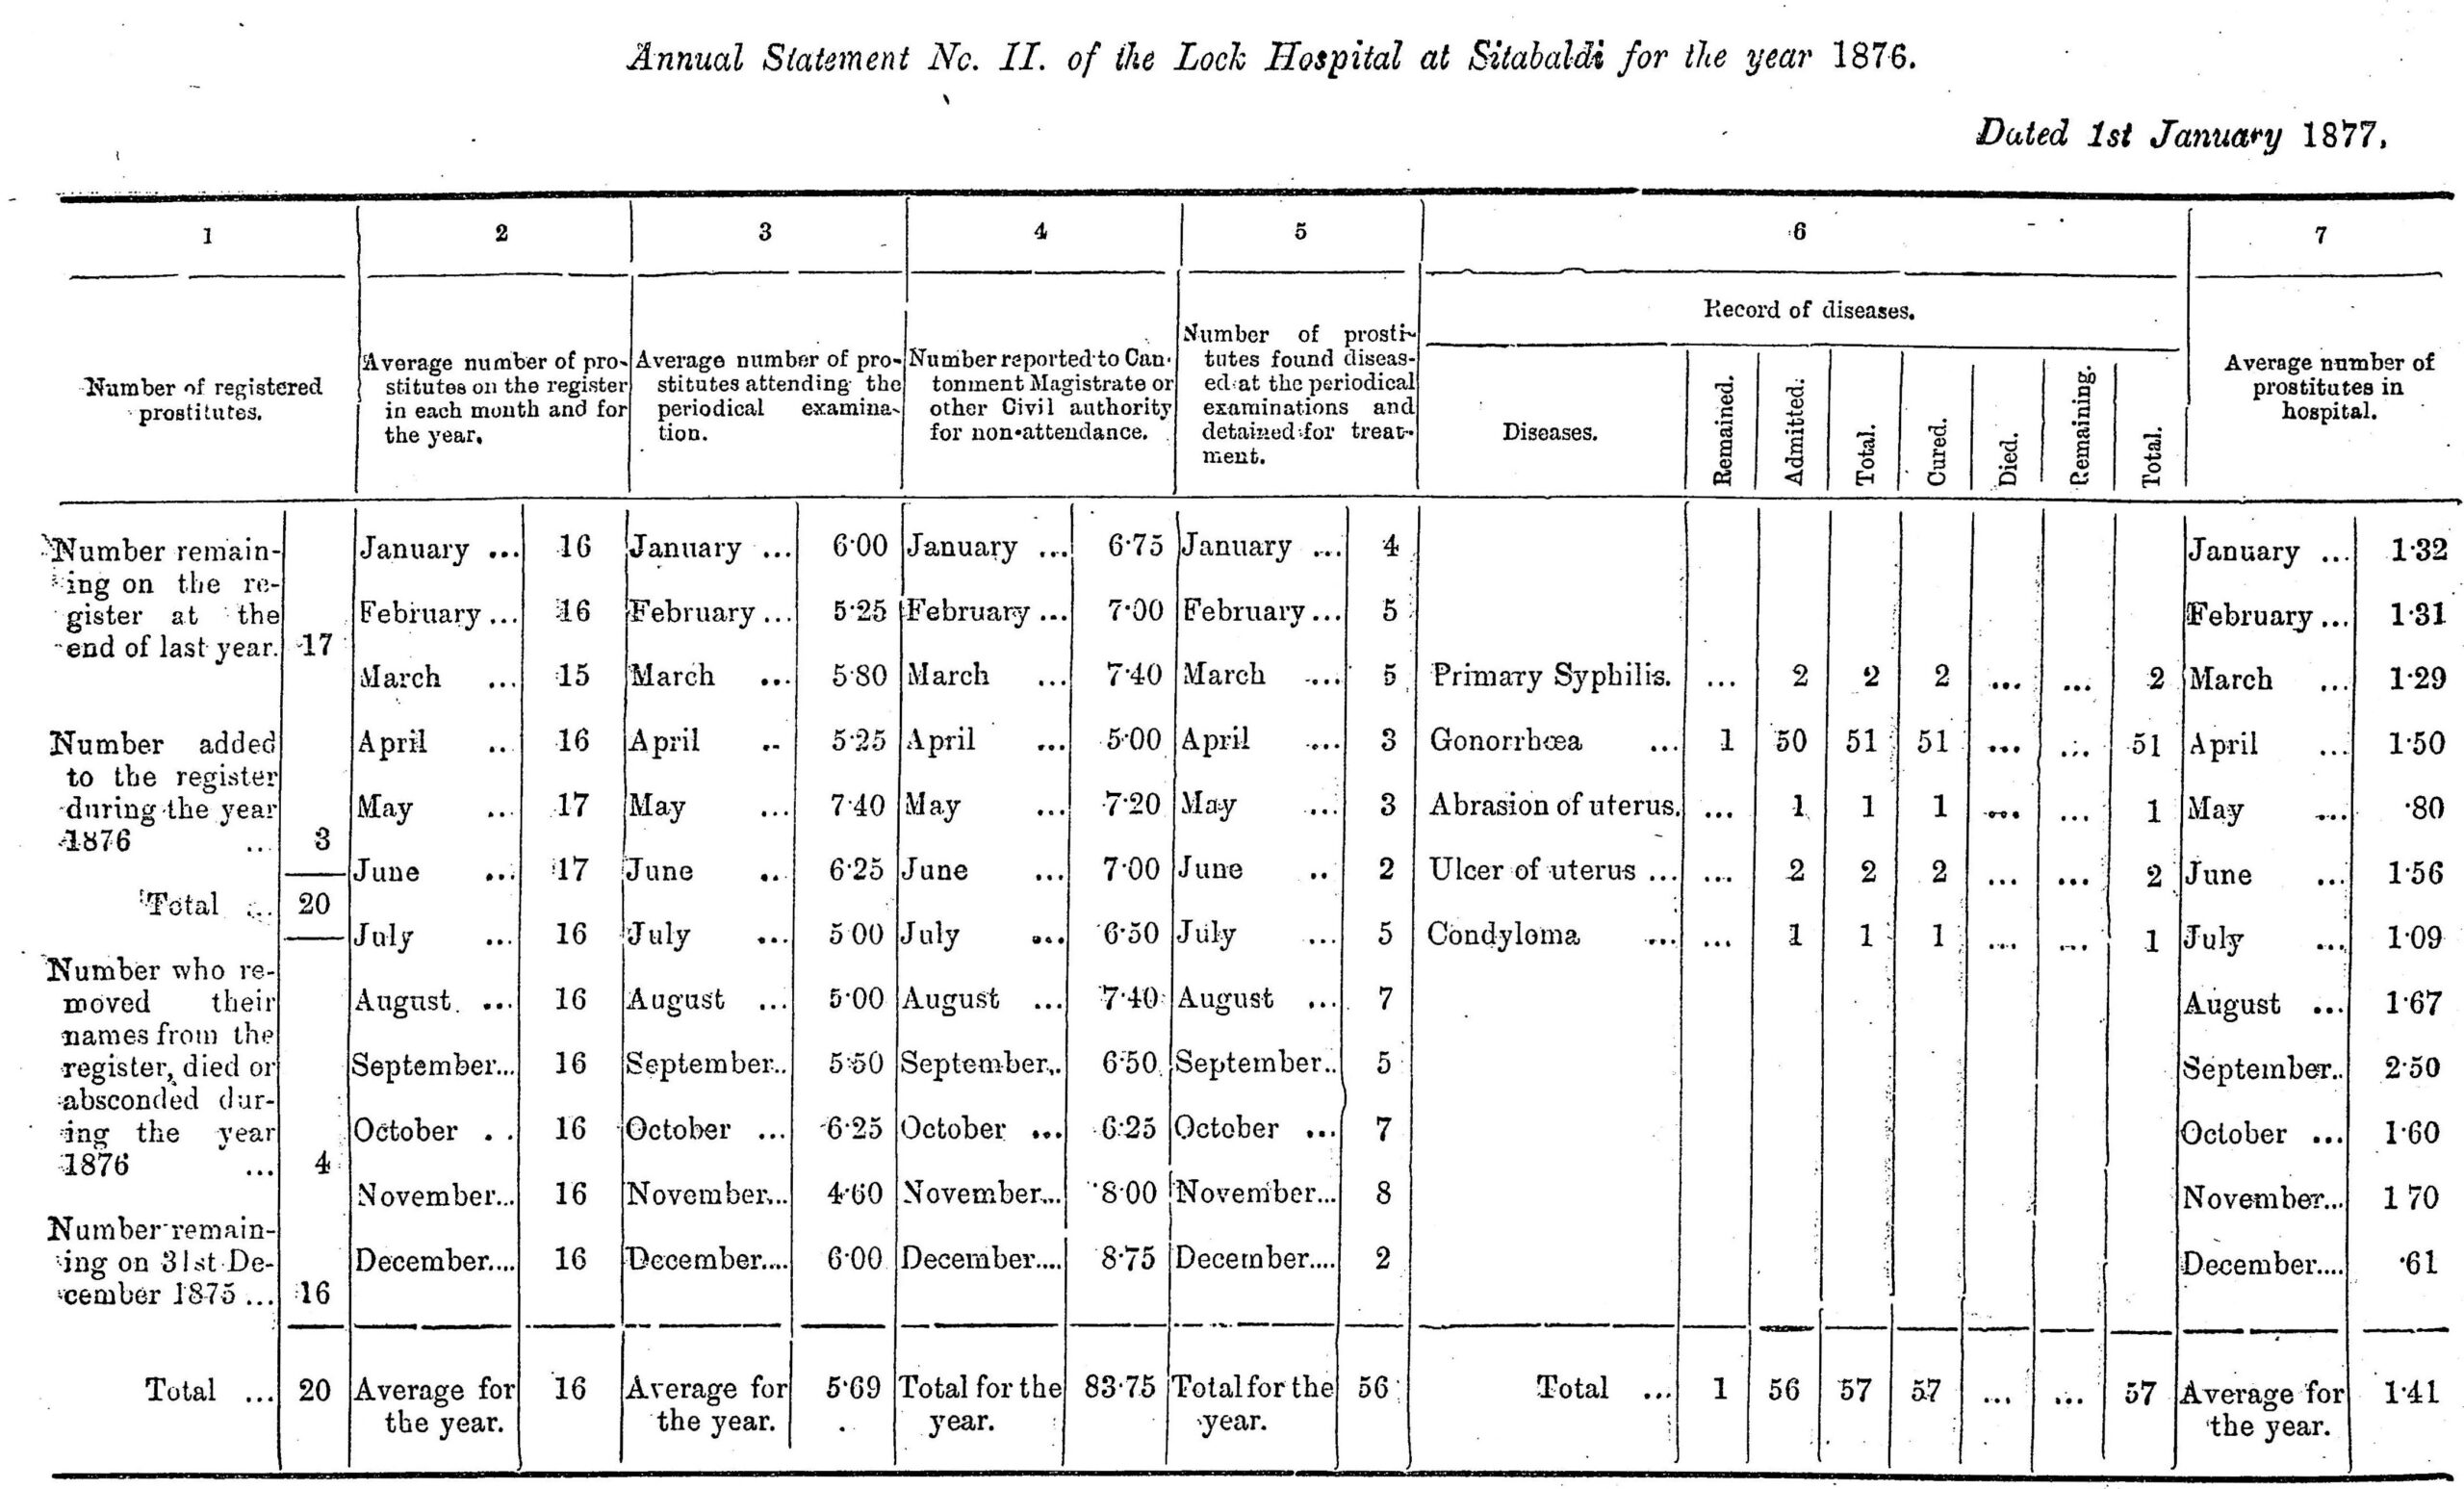 Table showing the numbers of sex workers examined, admitted, and released from the lock hospital in Sitabaldi in 1876